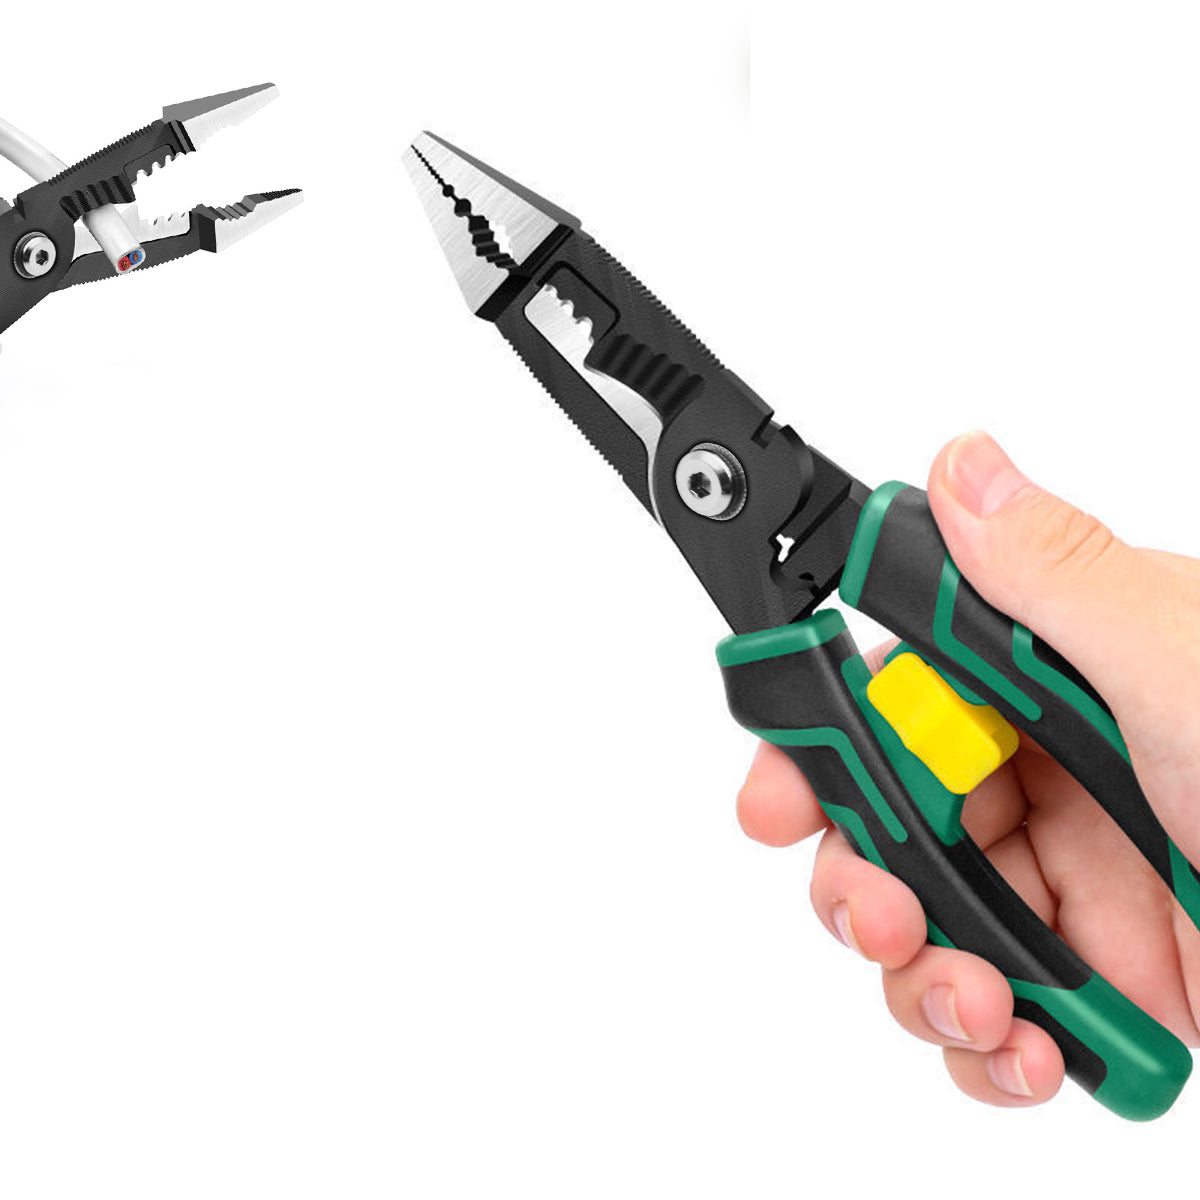 ZIBUYU 7-in-1 Wire Stripper, Wire Stripping Tool, Wire Cutter Stripping Tool for Electric Cable Stripping Cutting and Crimping, Green